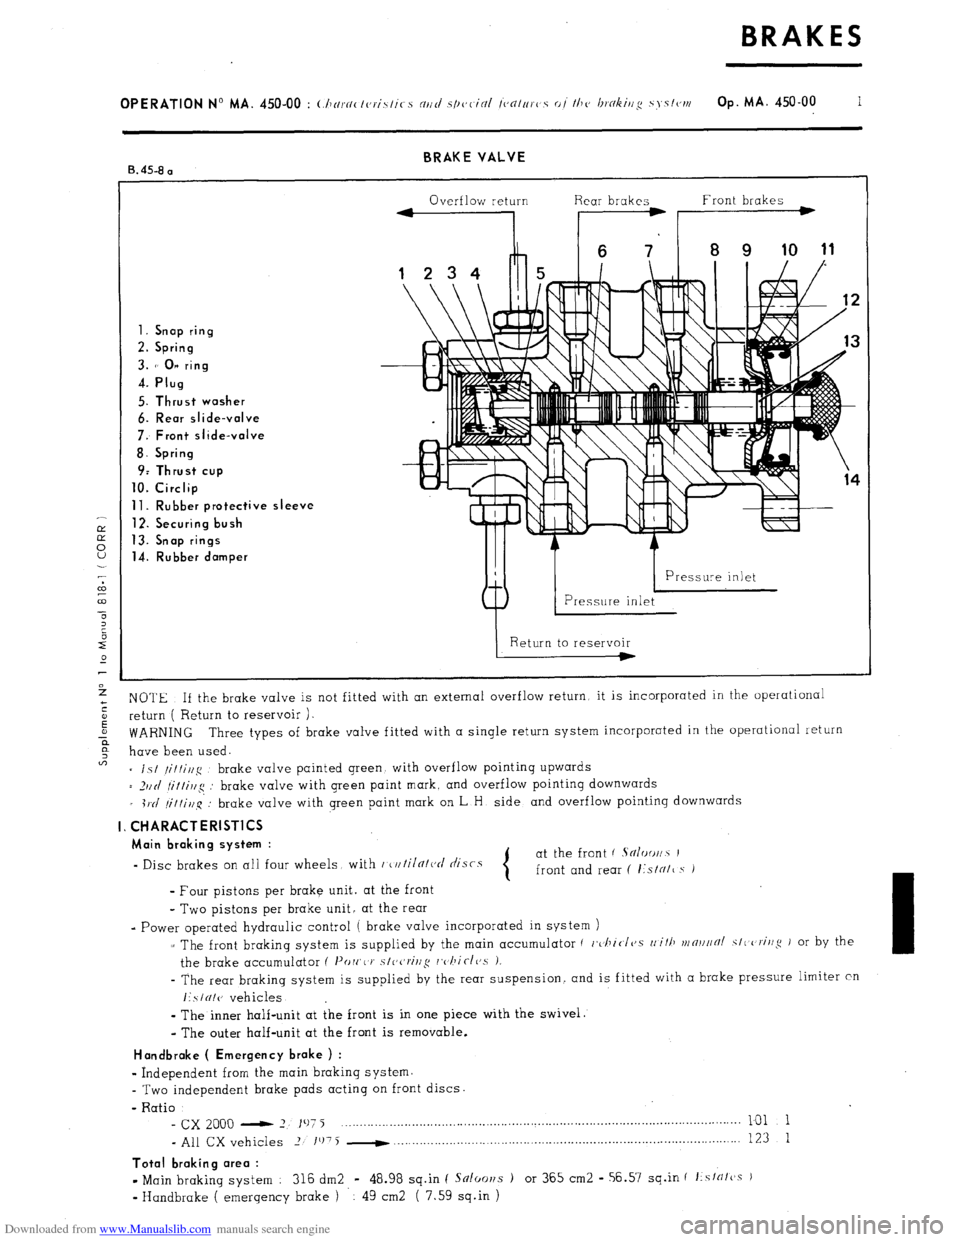 Citroen CX 1980 1.G Workshop Manual Downloaded from www.Manualslib.com manuals search engine BRAKE VALVE 
B. 45-8 a 
Overflow return Rear brakes Front brakes 
1. Snap ring 
2. Spring 
3. 1’ 0” ring 
4. Plug 
5. Thrust washer 
6. Rea